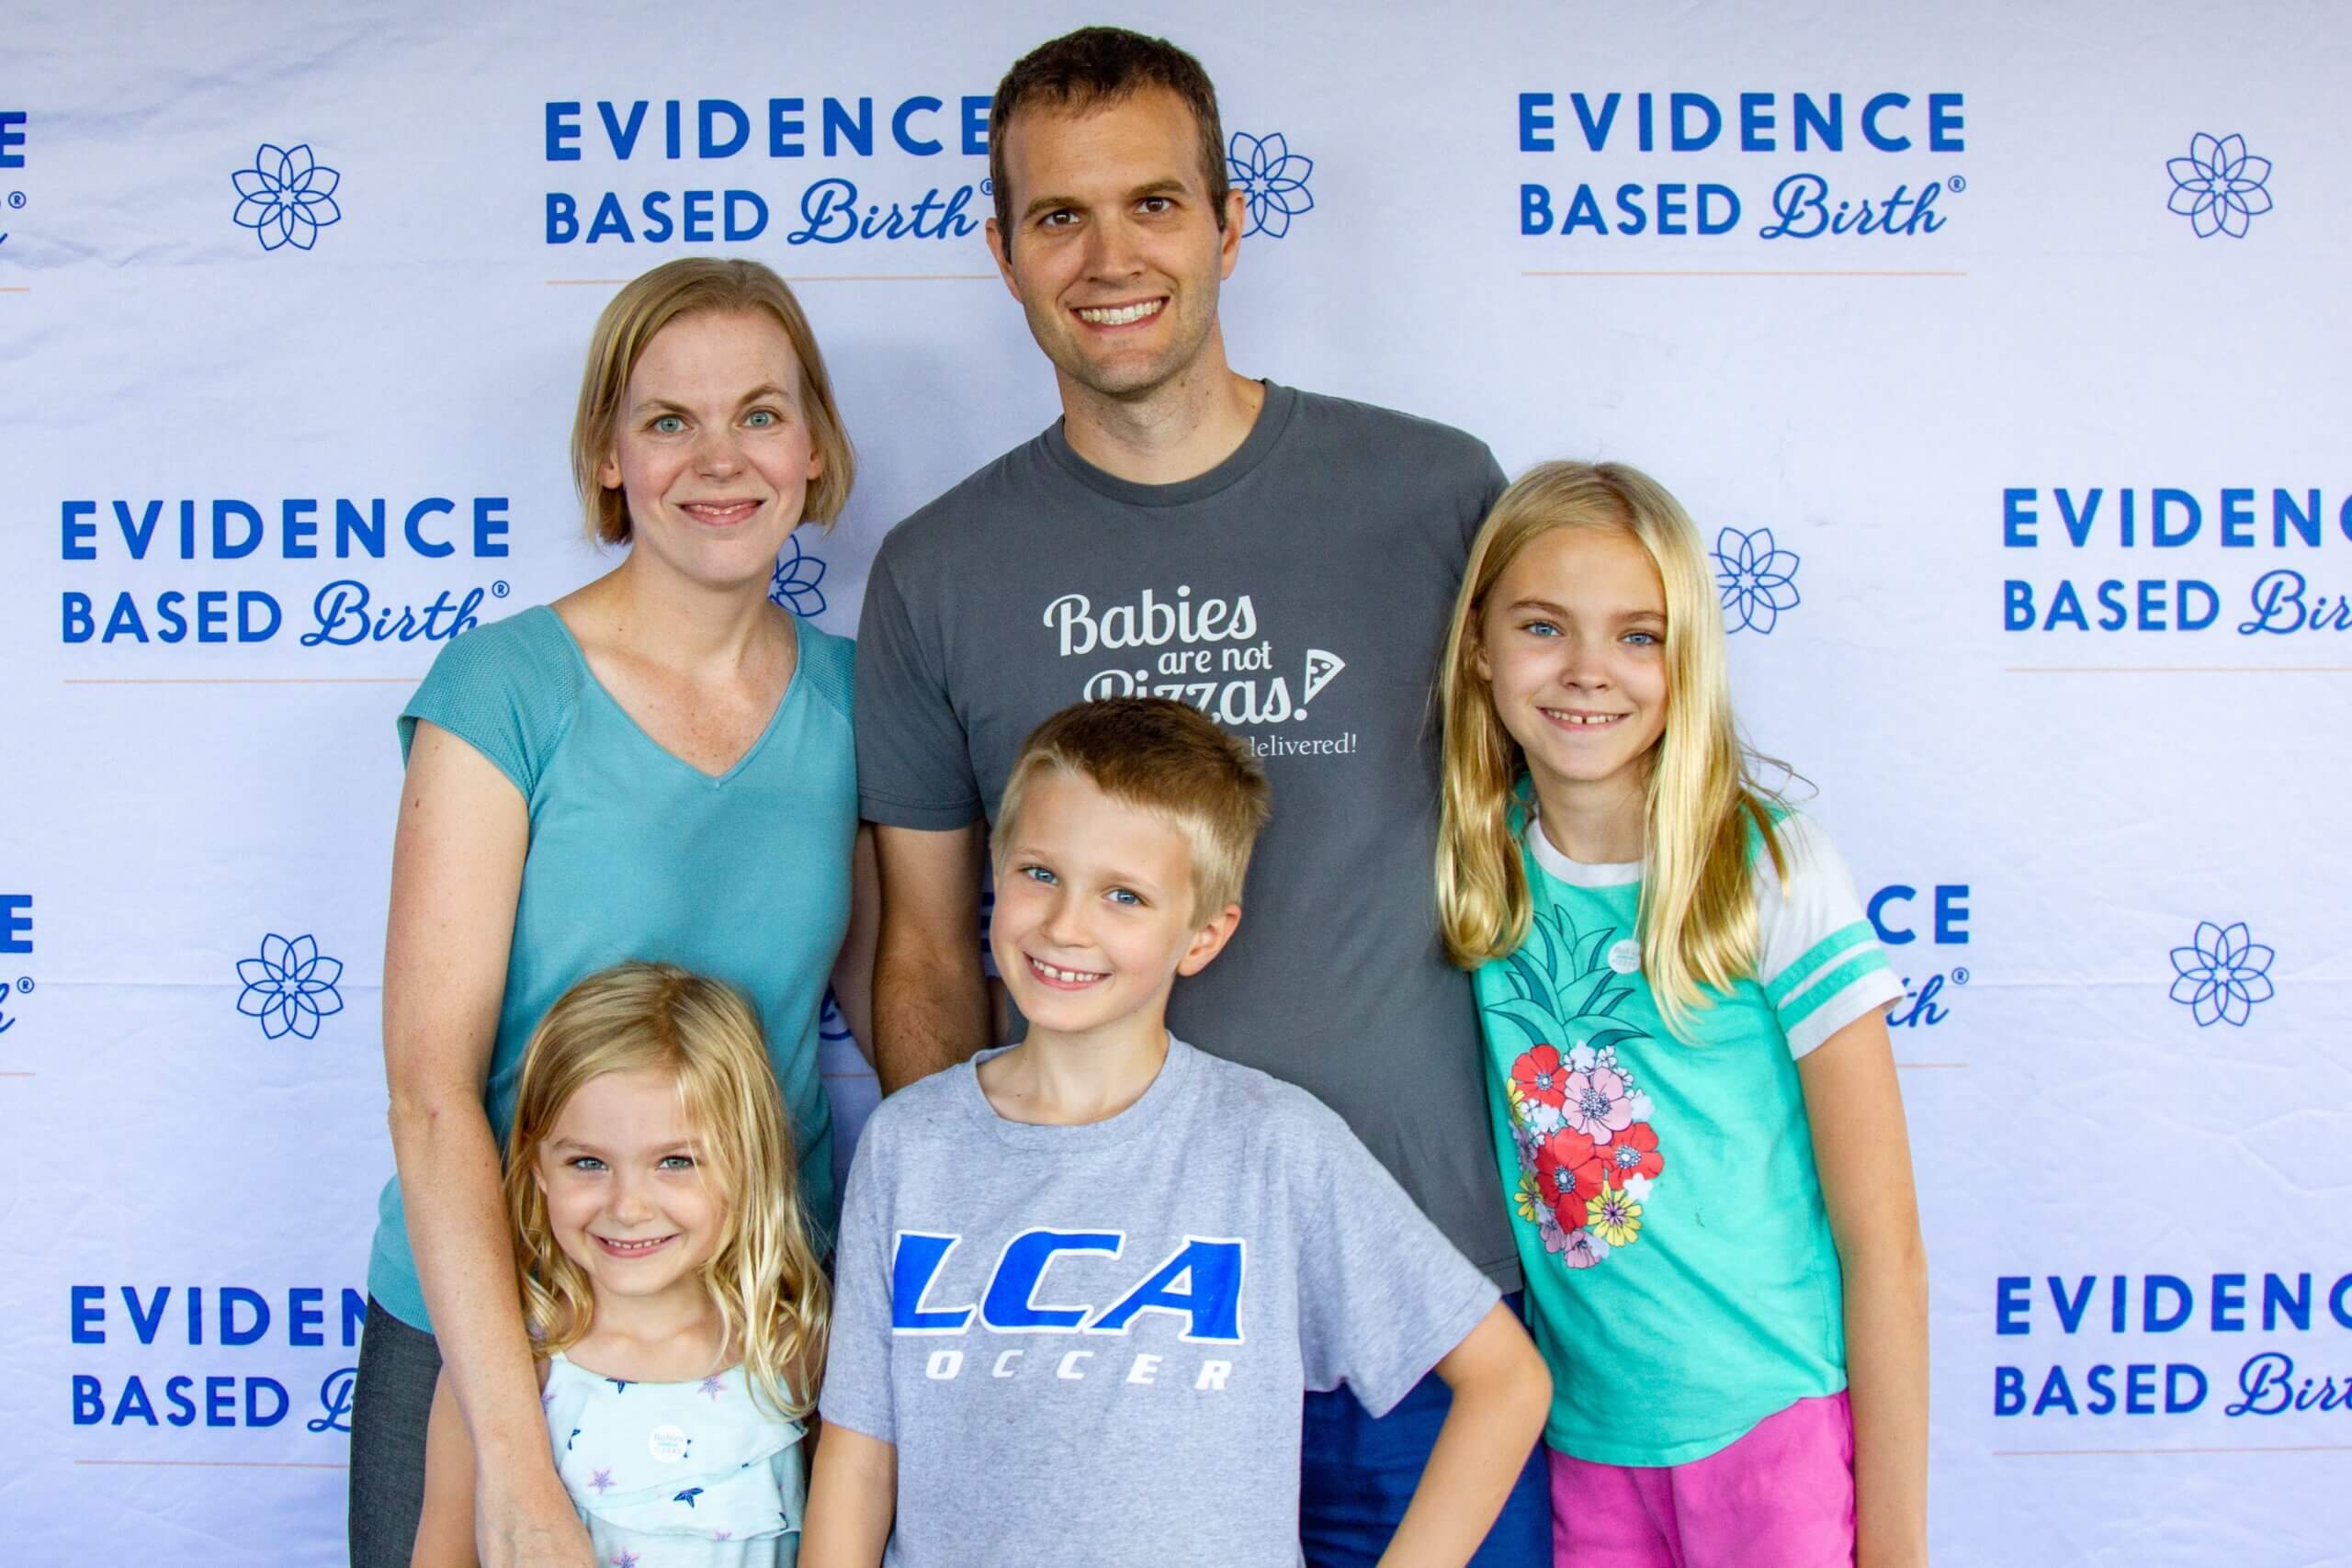 Rebecca Dekker, her husband, and three kids (two girls and one boy) posing in front of a step and repeat that says "Evidence Based Birth"